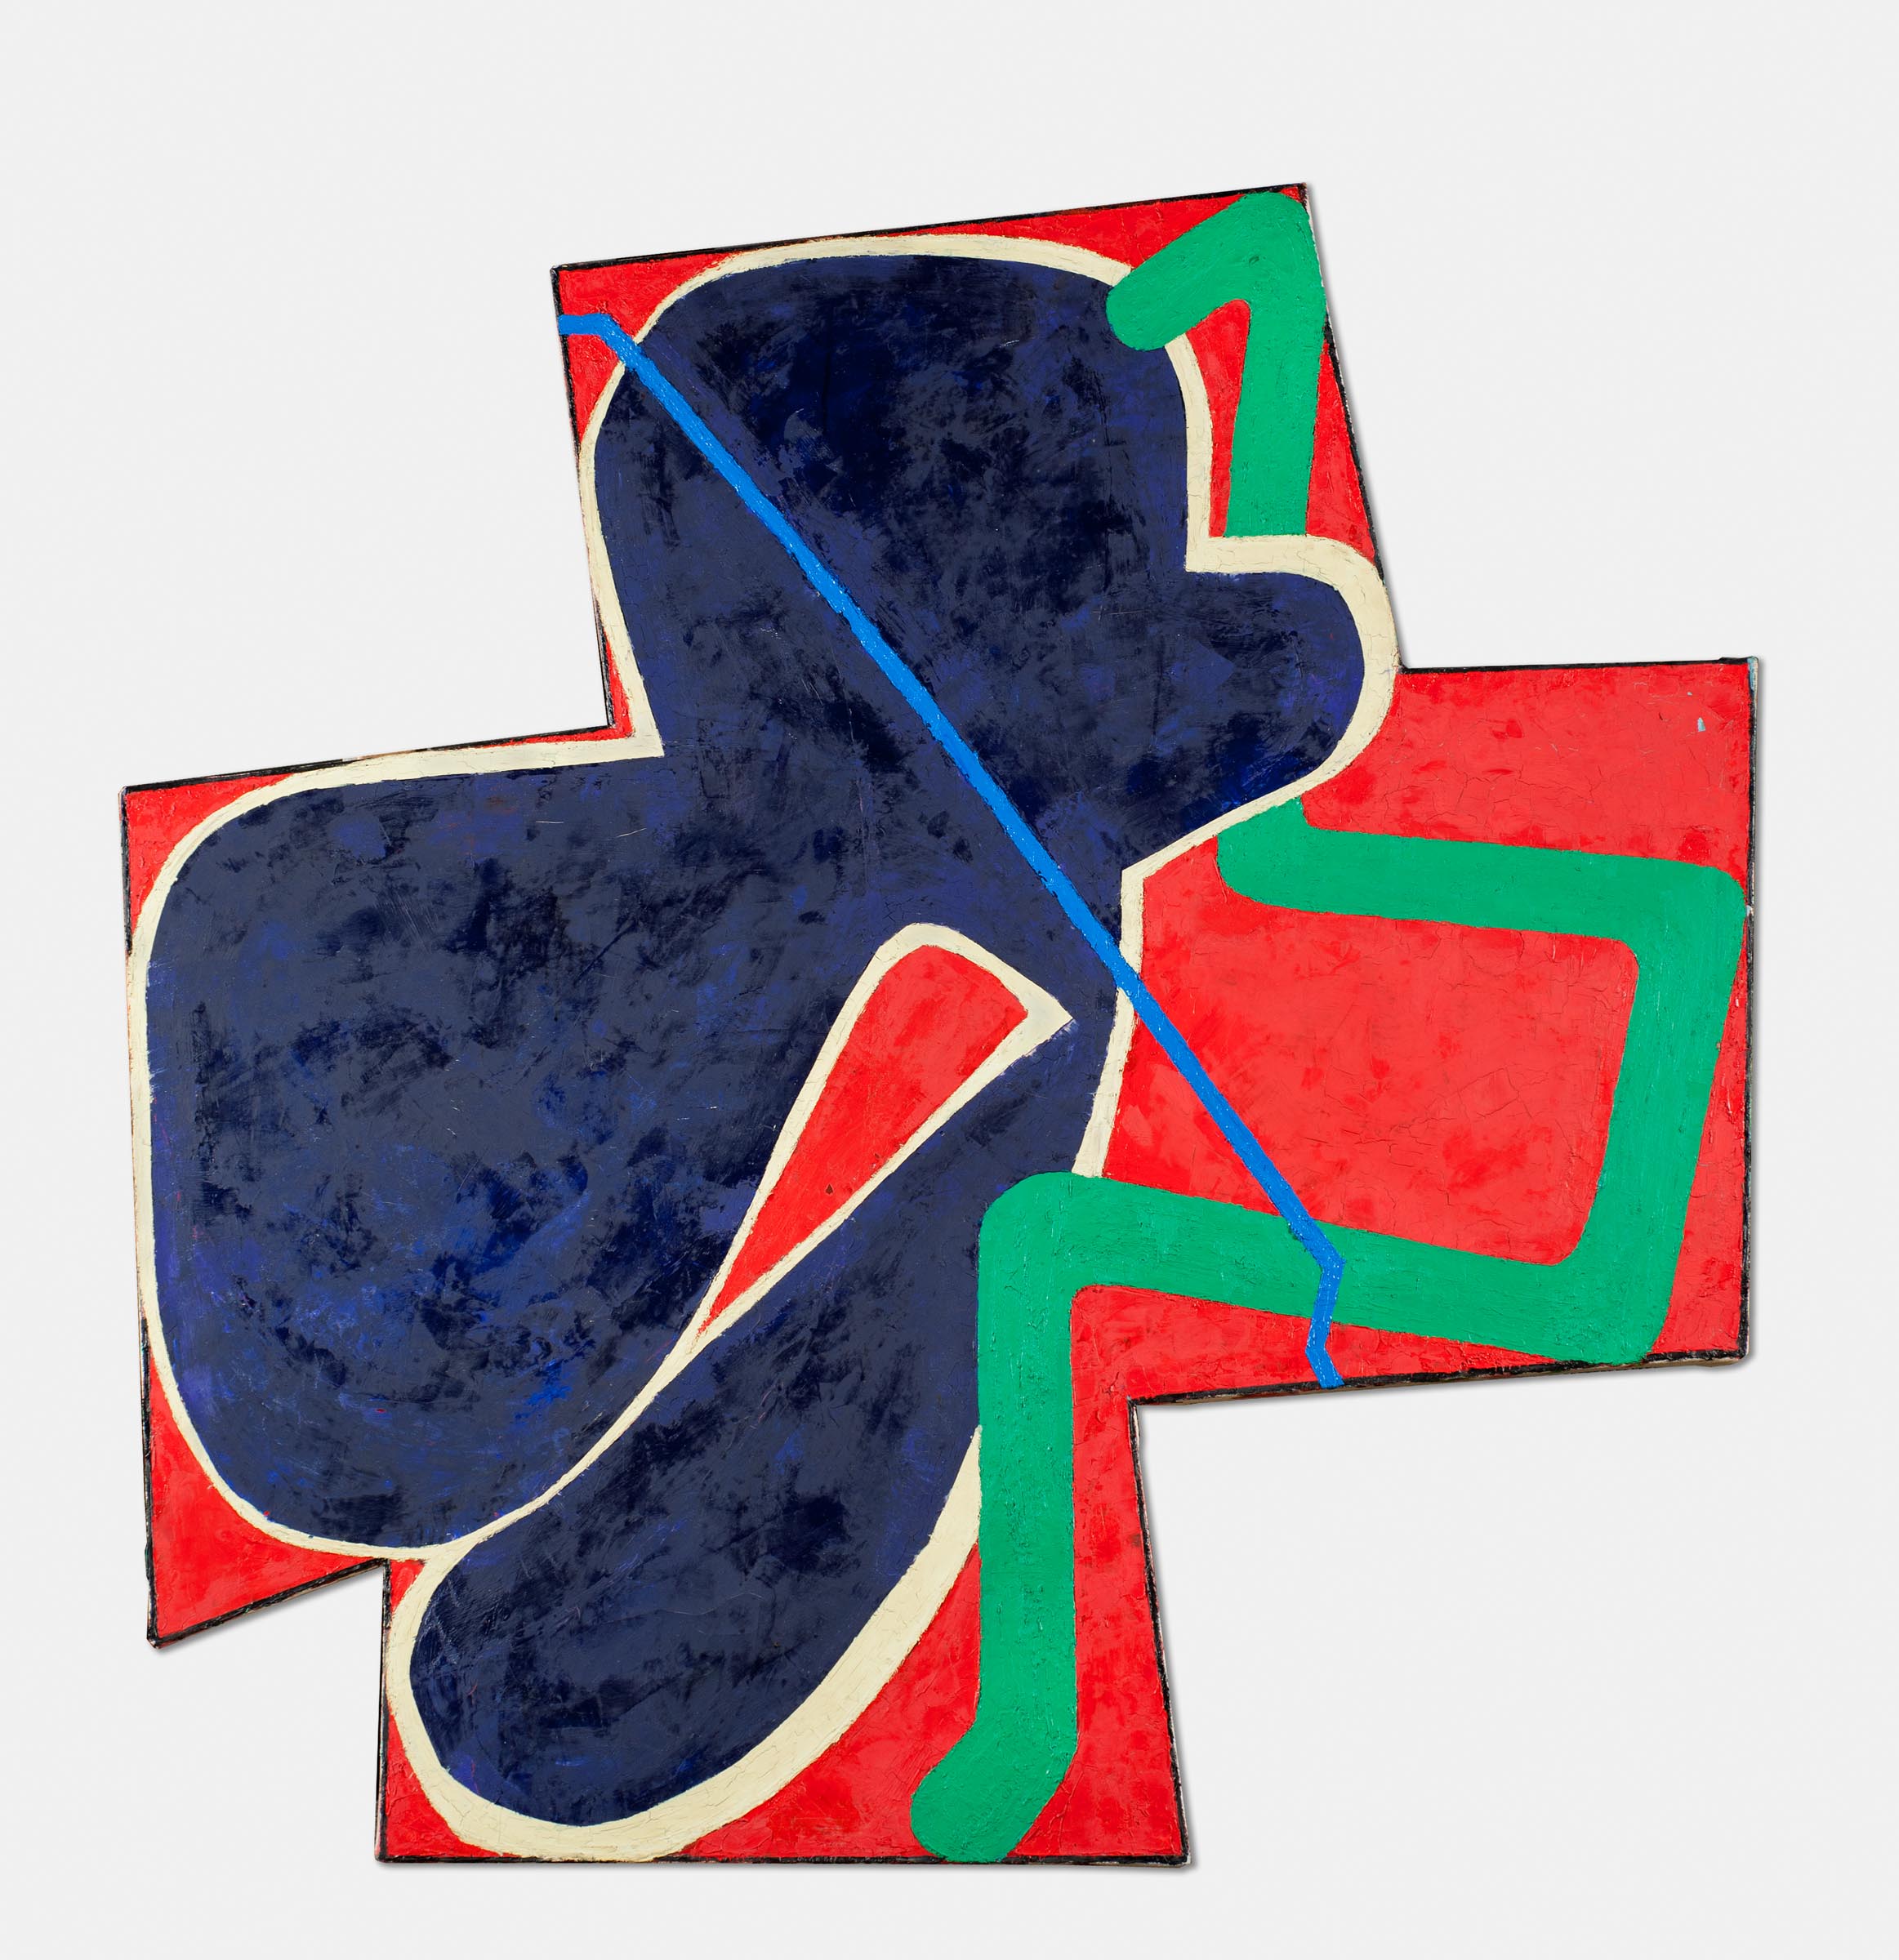 Elizabeth Murray, Try, 1979, oil on canvas, Gift of Dr. and Mrs. Karl Salatka in honor of Richard Armstrong